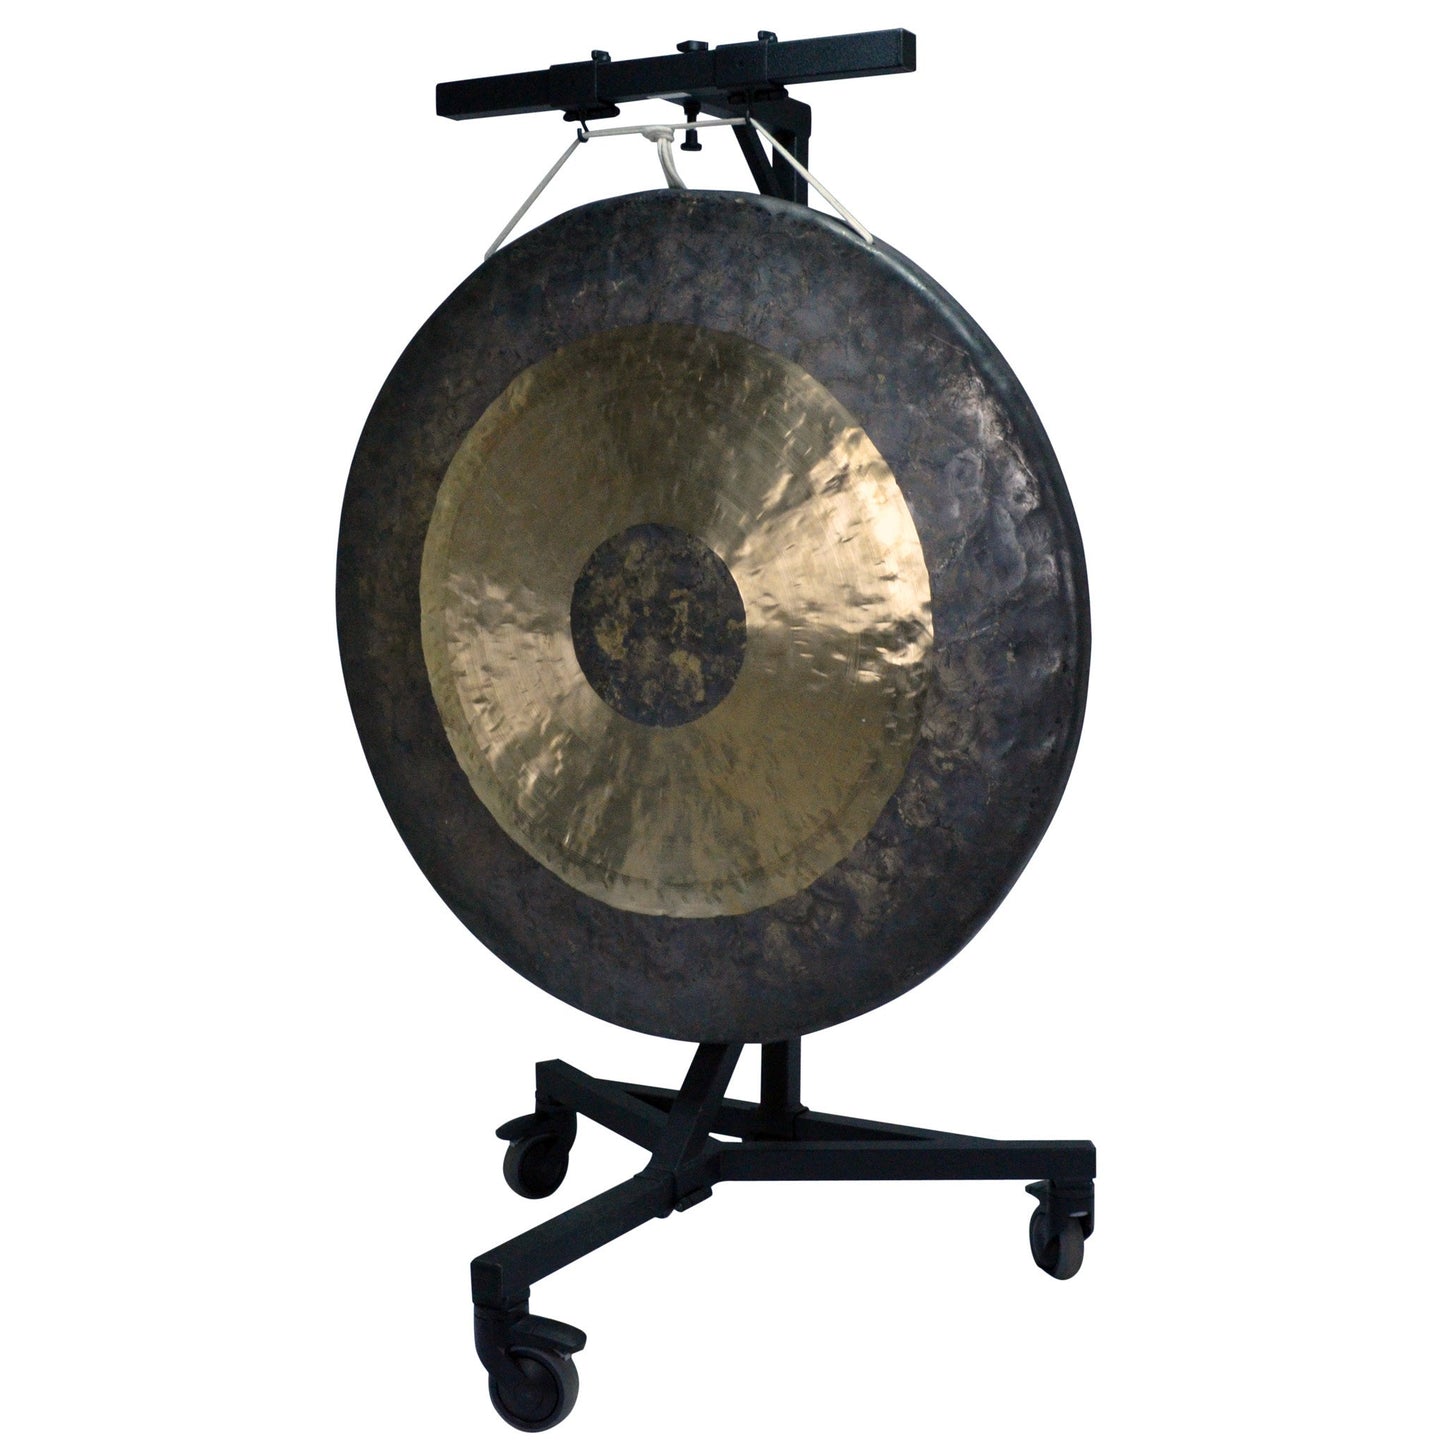 40" Chau Gong on Adams Gong Stand with Mallet